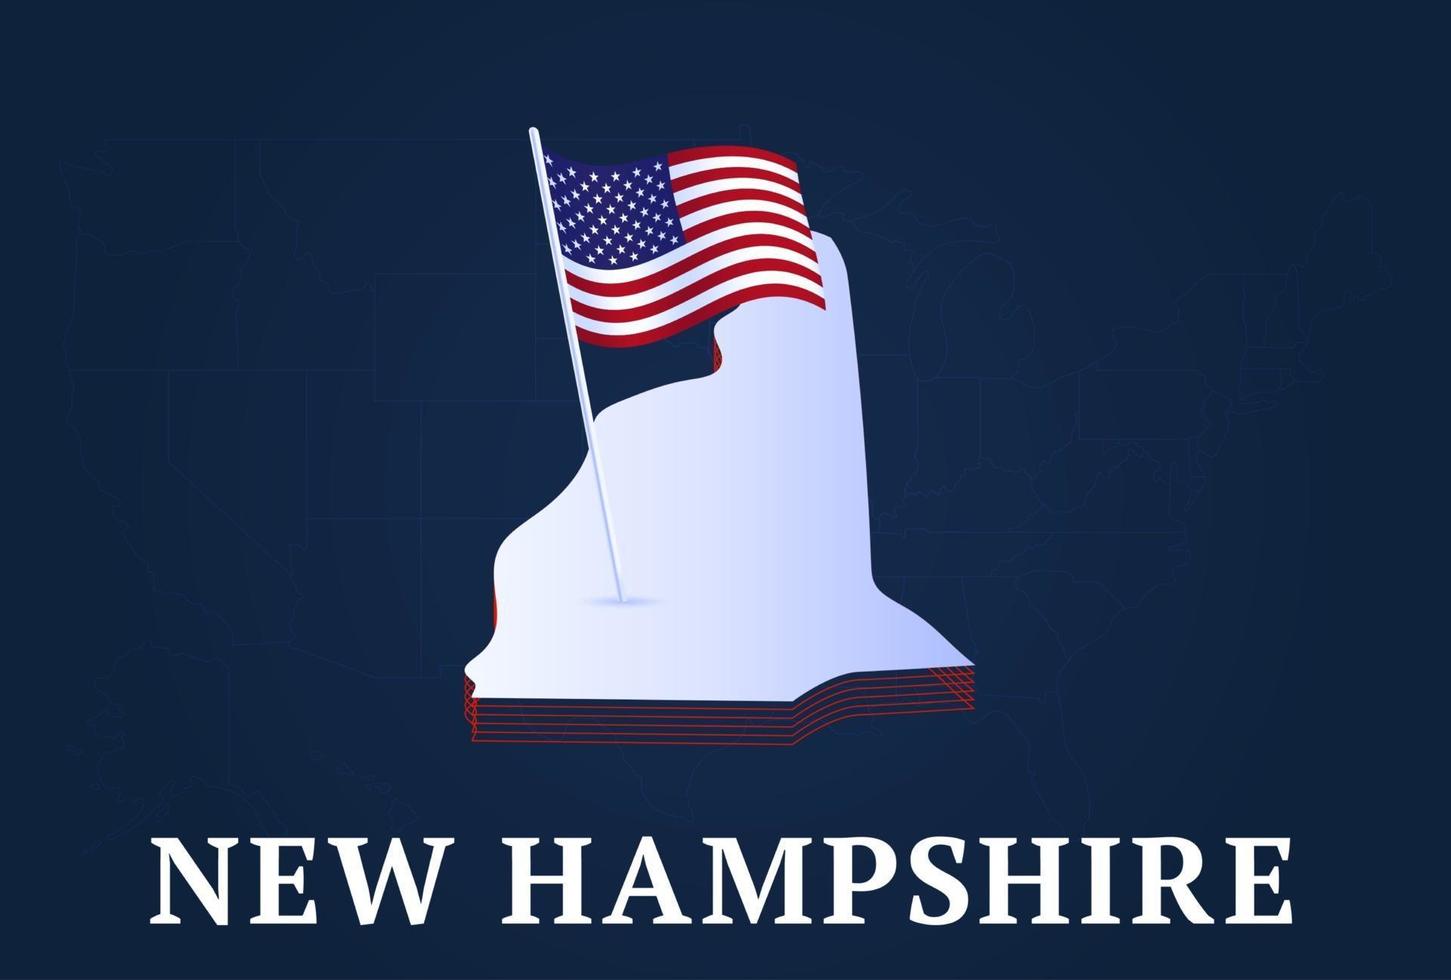 new hampshire state Isometric map and USA national flag 3D isometric shape of us state Vector Illustration